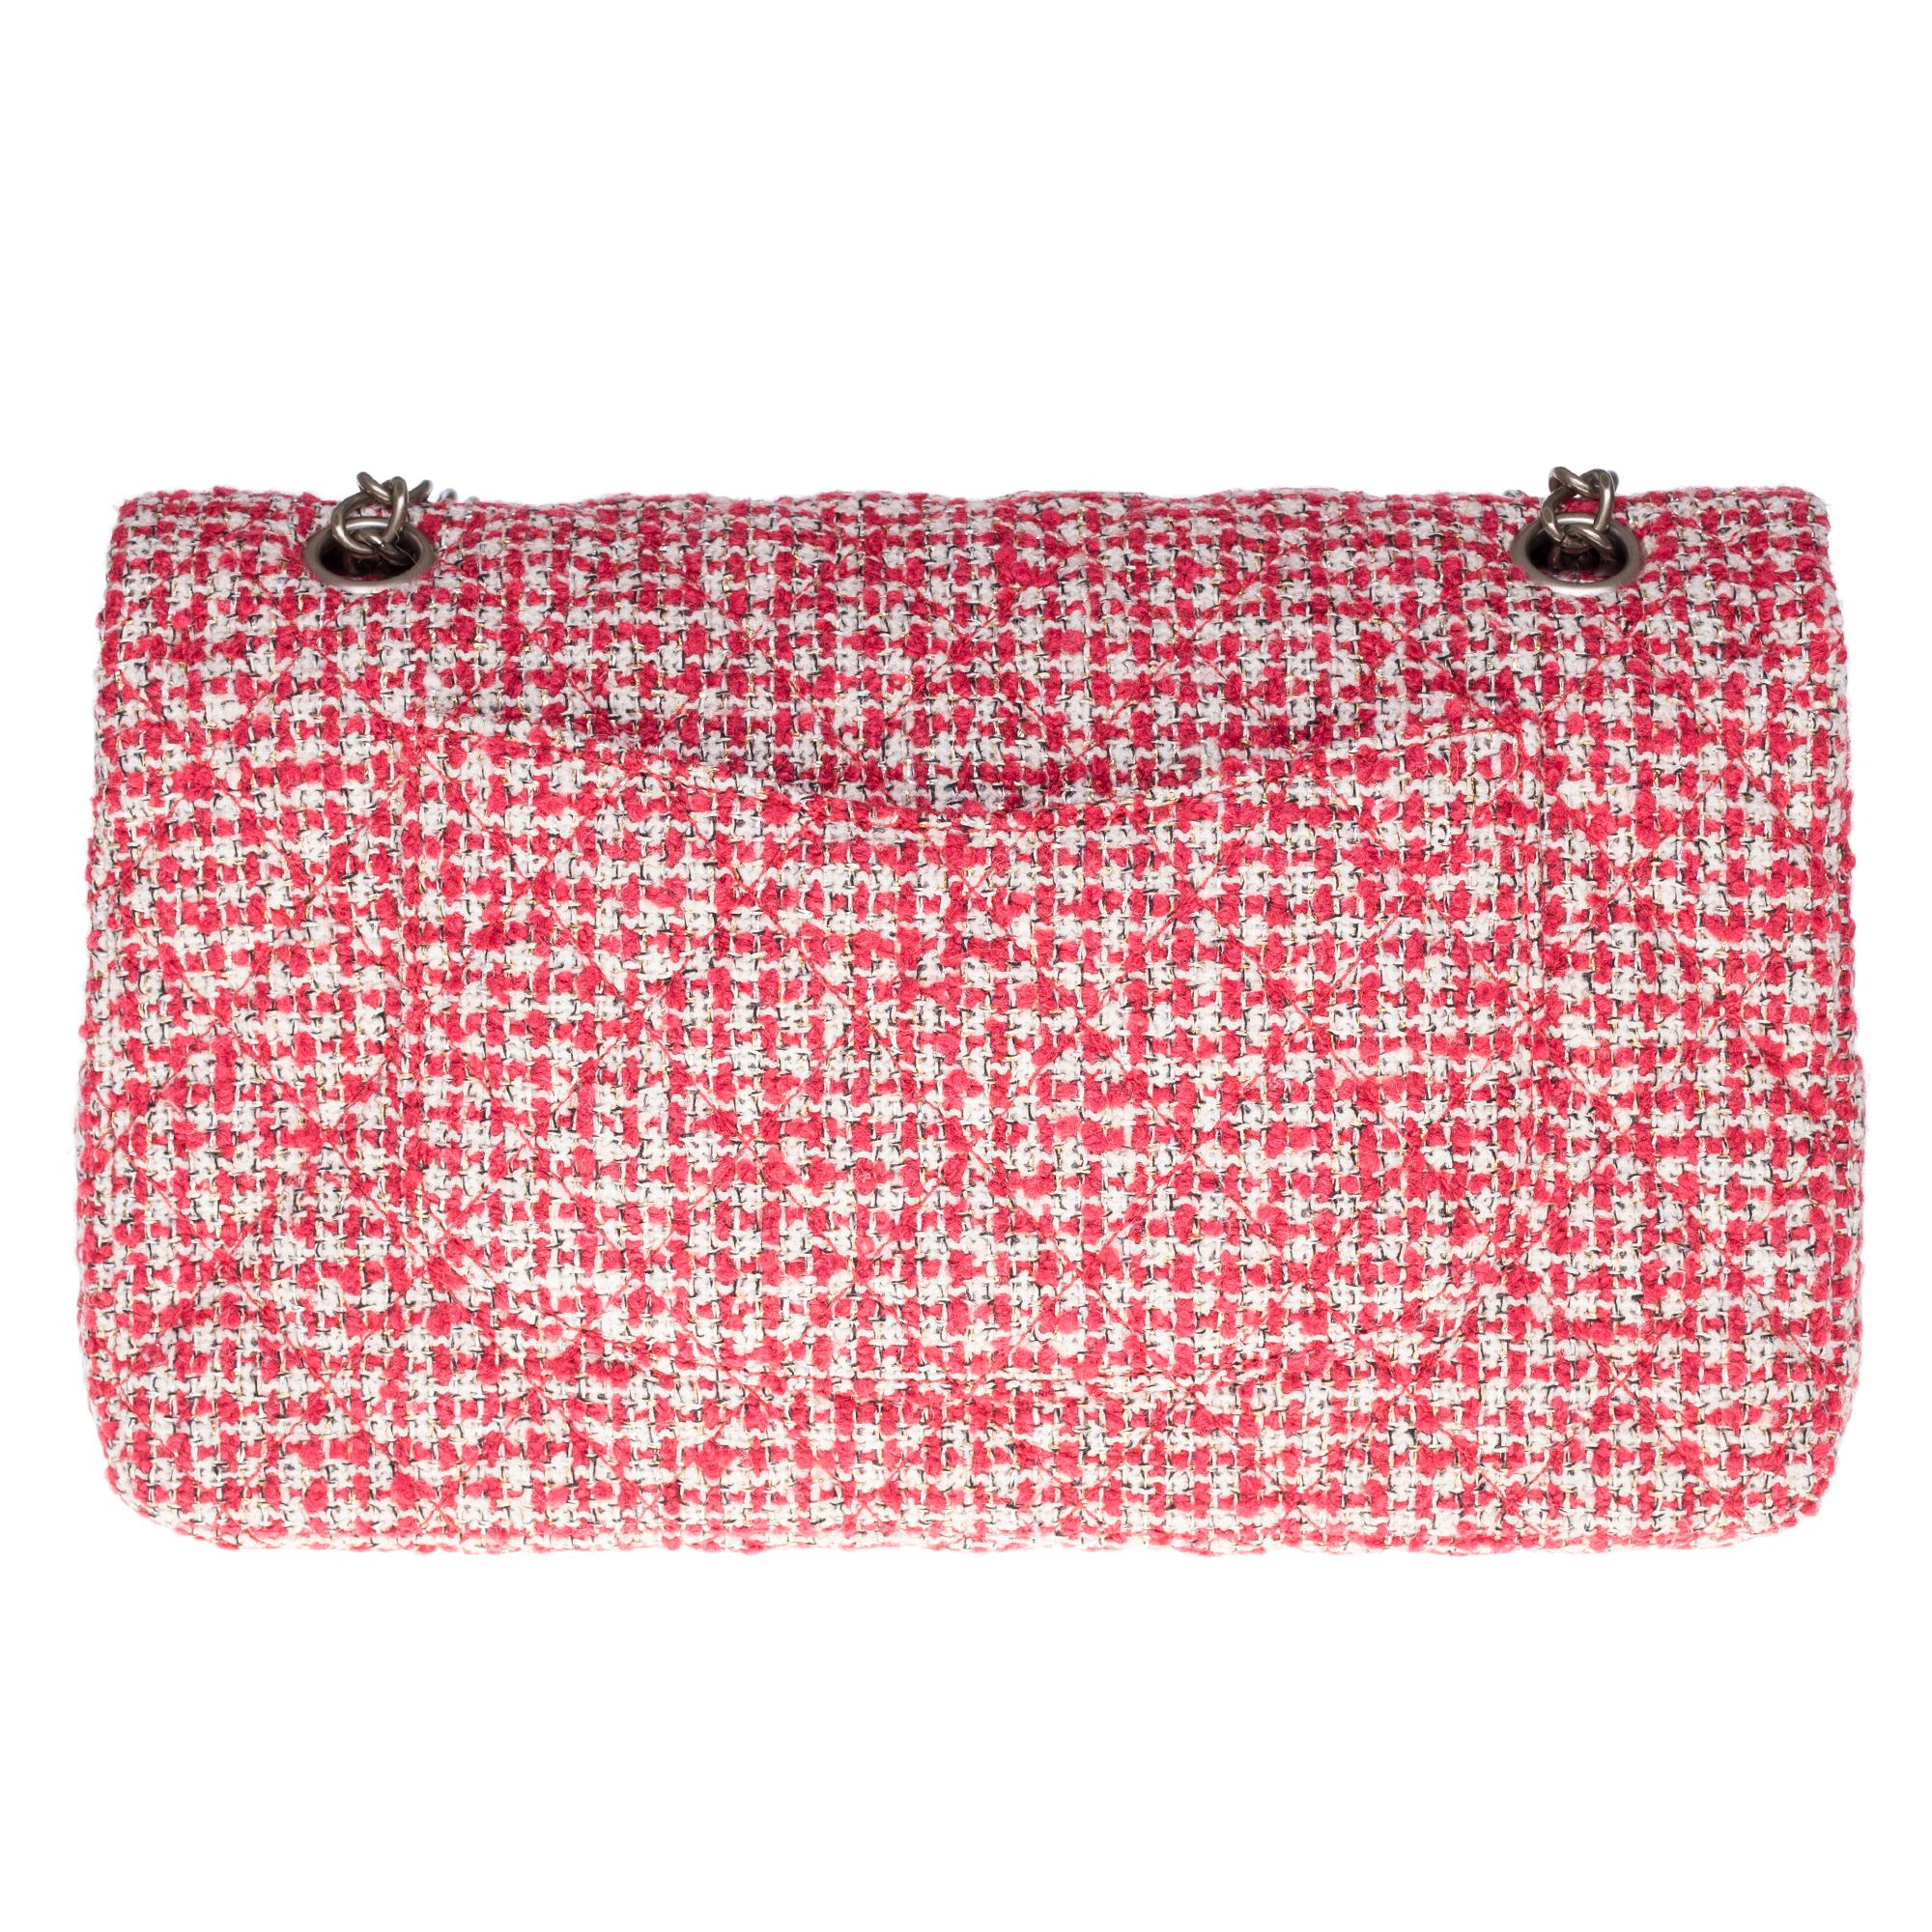 Rare and stunning Timeless double flap bag in red and white quilted Tweed, silver metal trim, silver metal handle intertwined with tweed and white and red velvet allowing a hand or shoulder support.
1 patch pocket on the back of the bag.
Padded flap